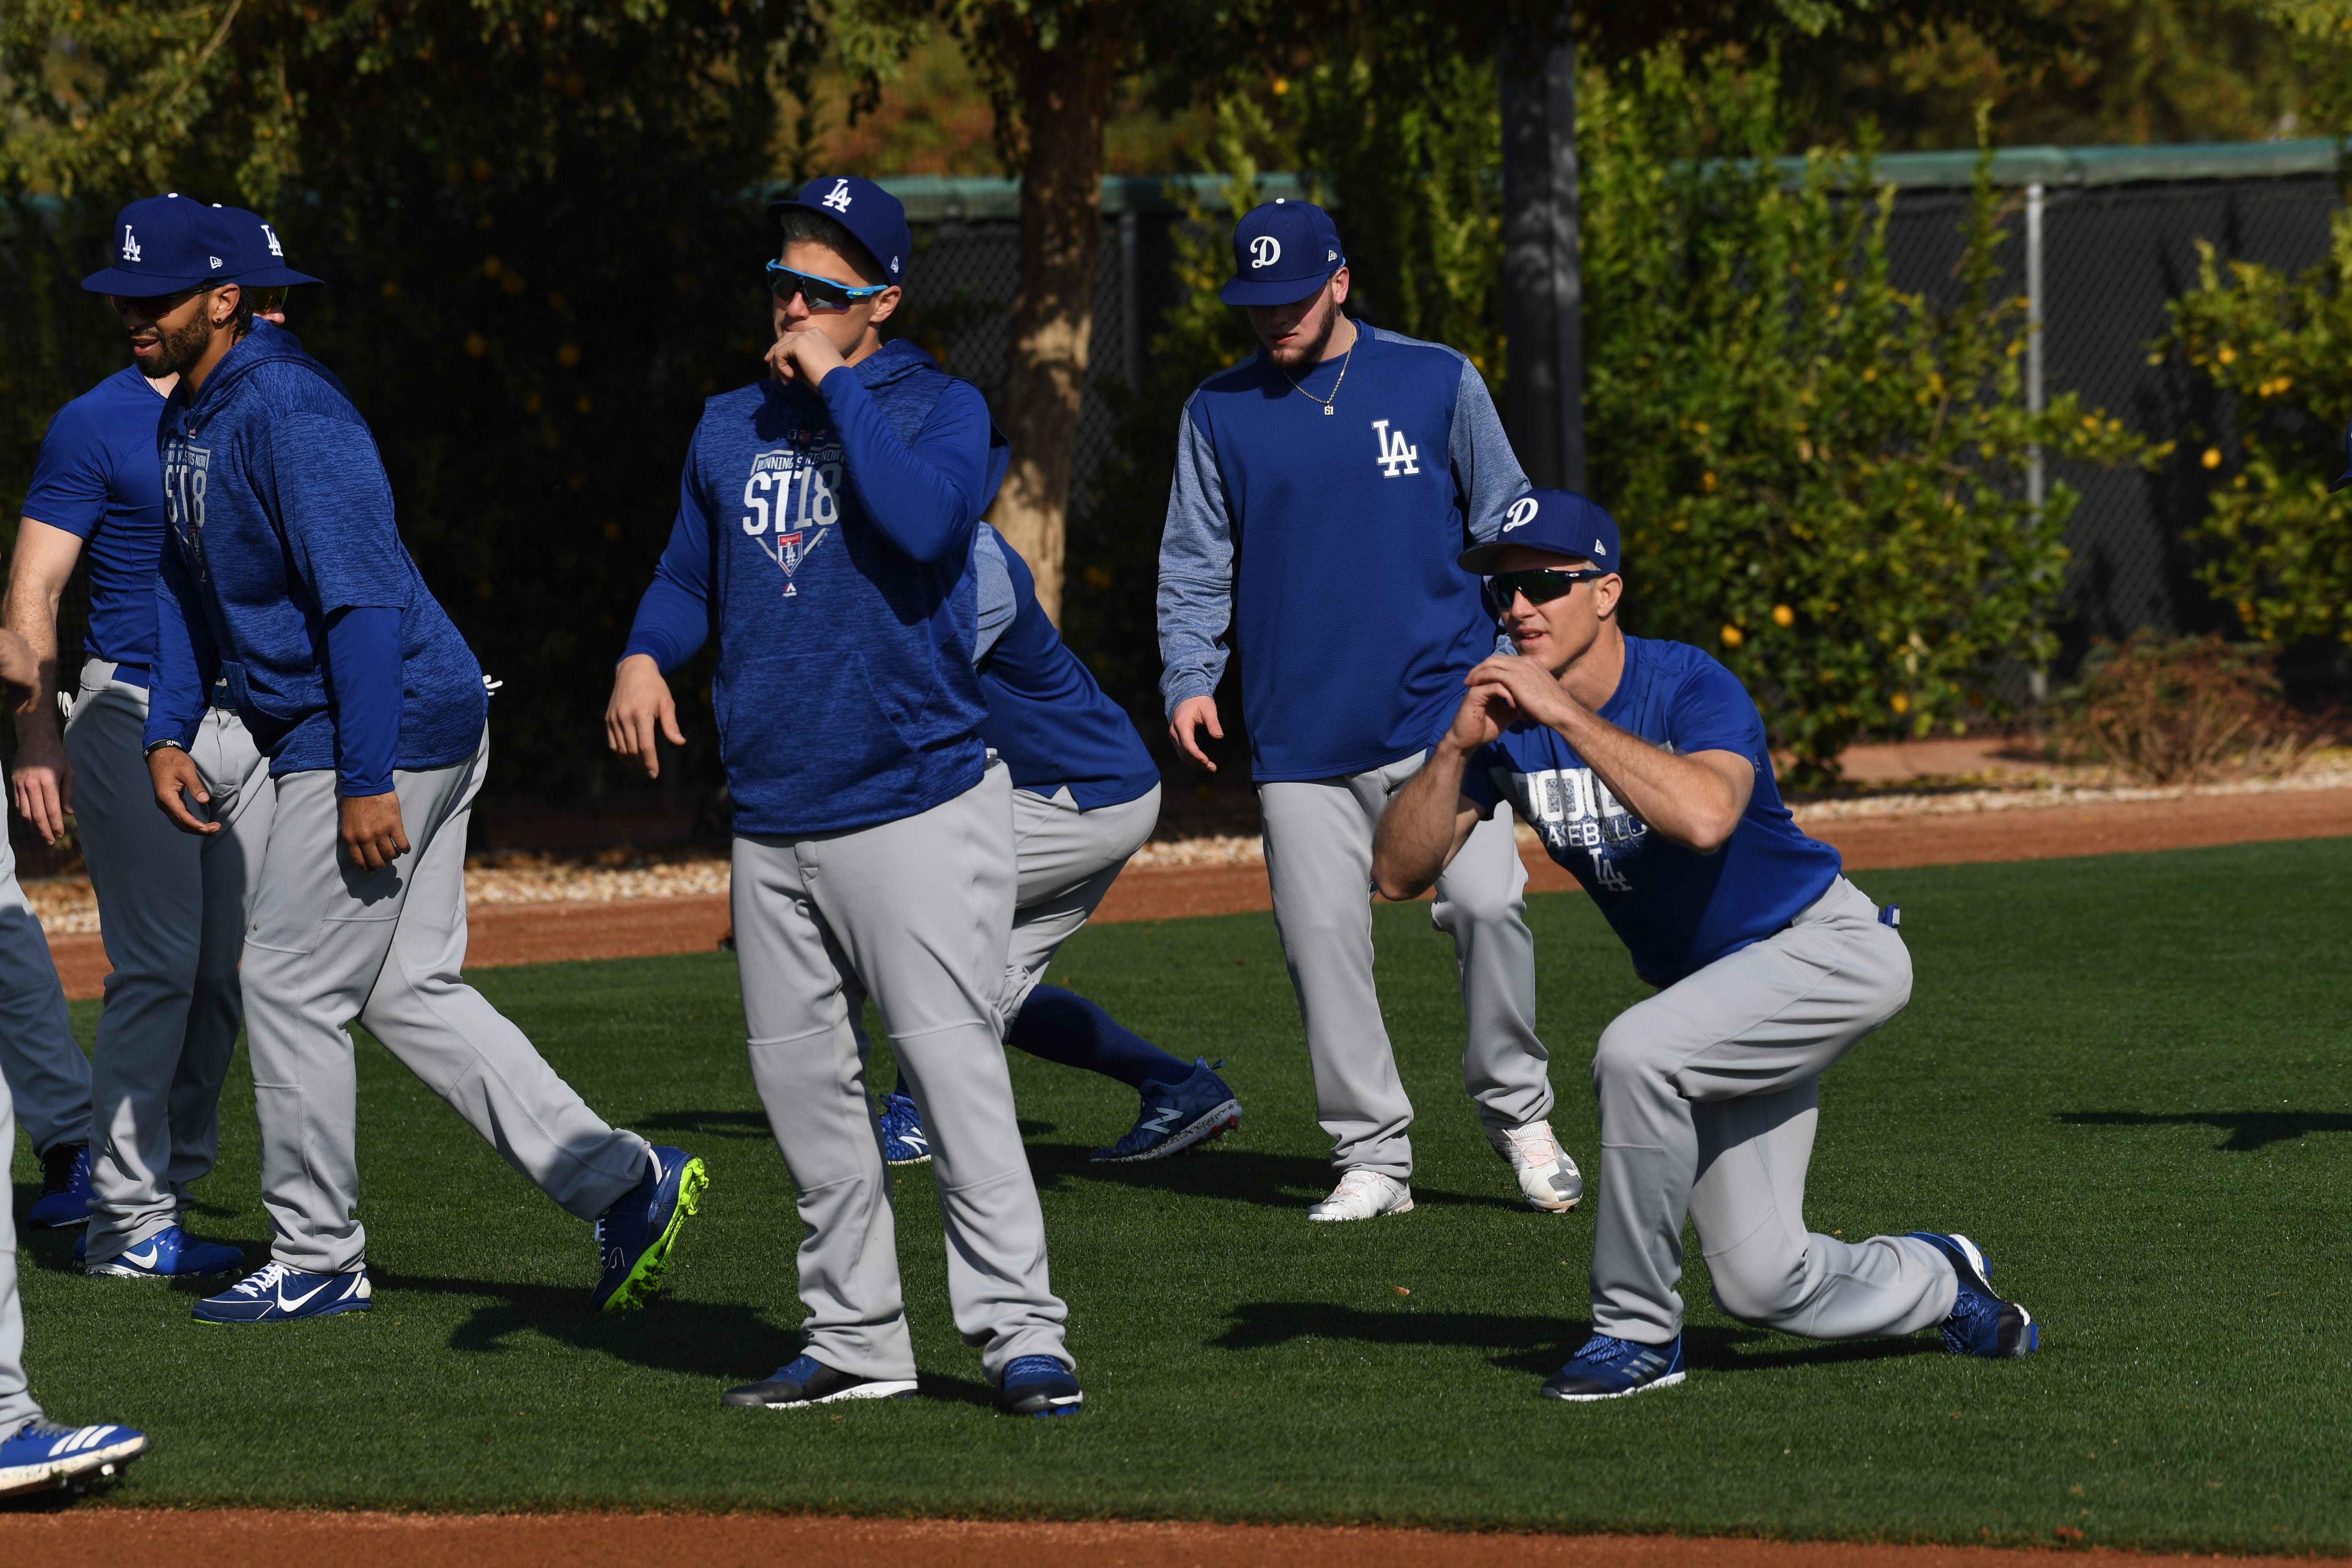 Beyond the Bison: Dodgers' Chase Utley becomes teammates with